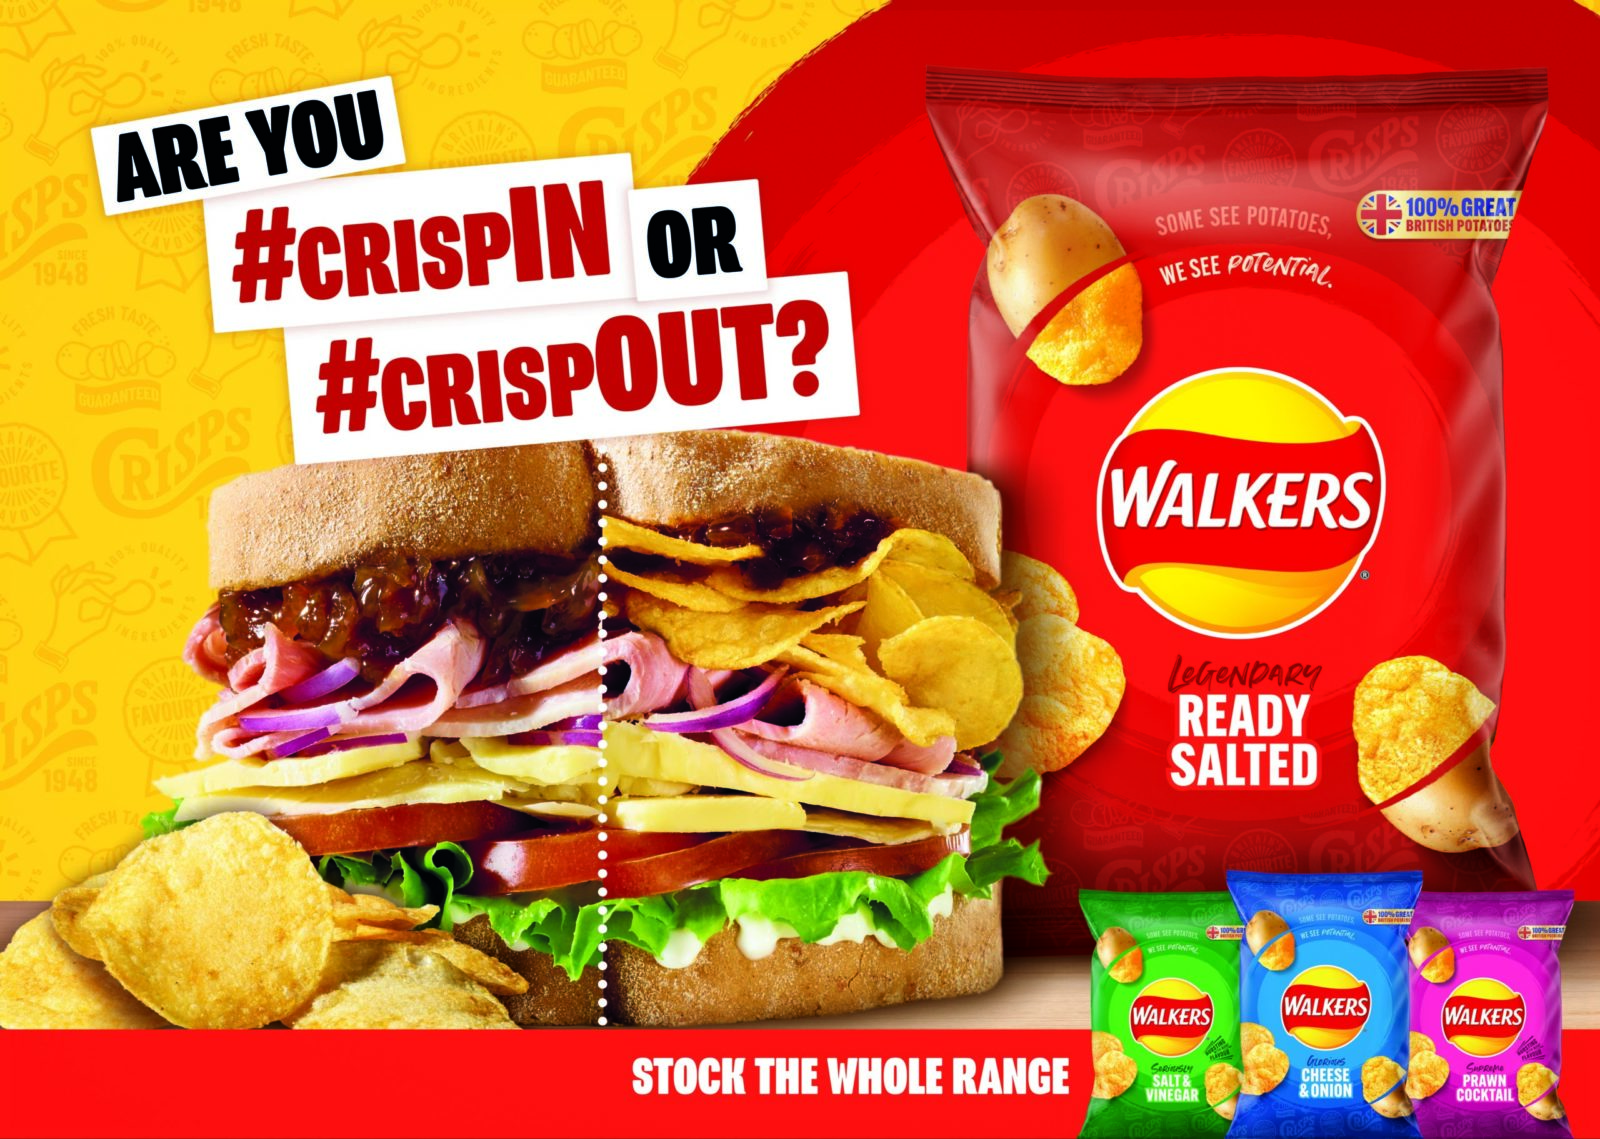 Walkers Crisps advert - Are you crisp in or crisp out (of your sandwich)